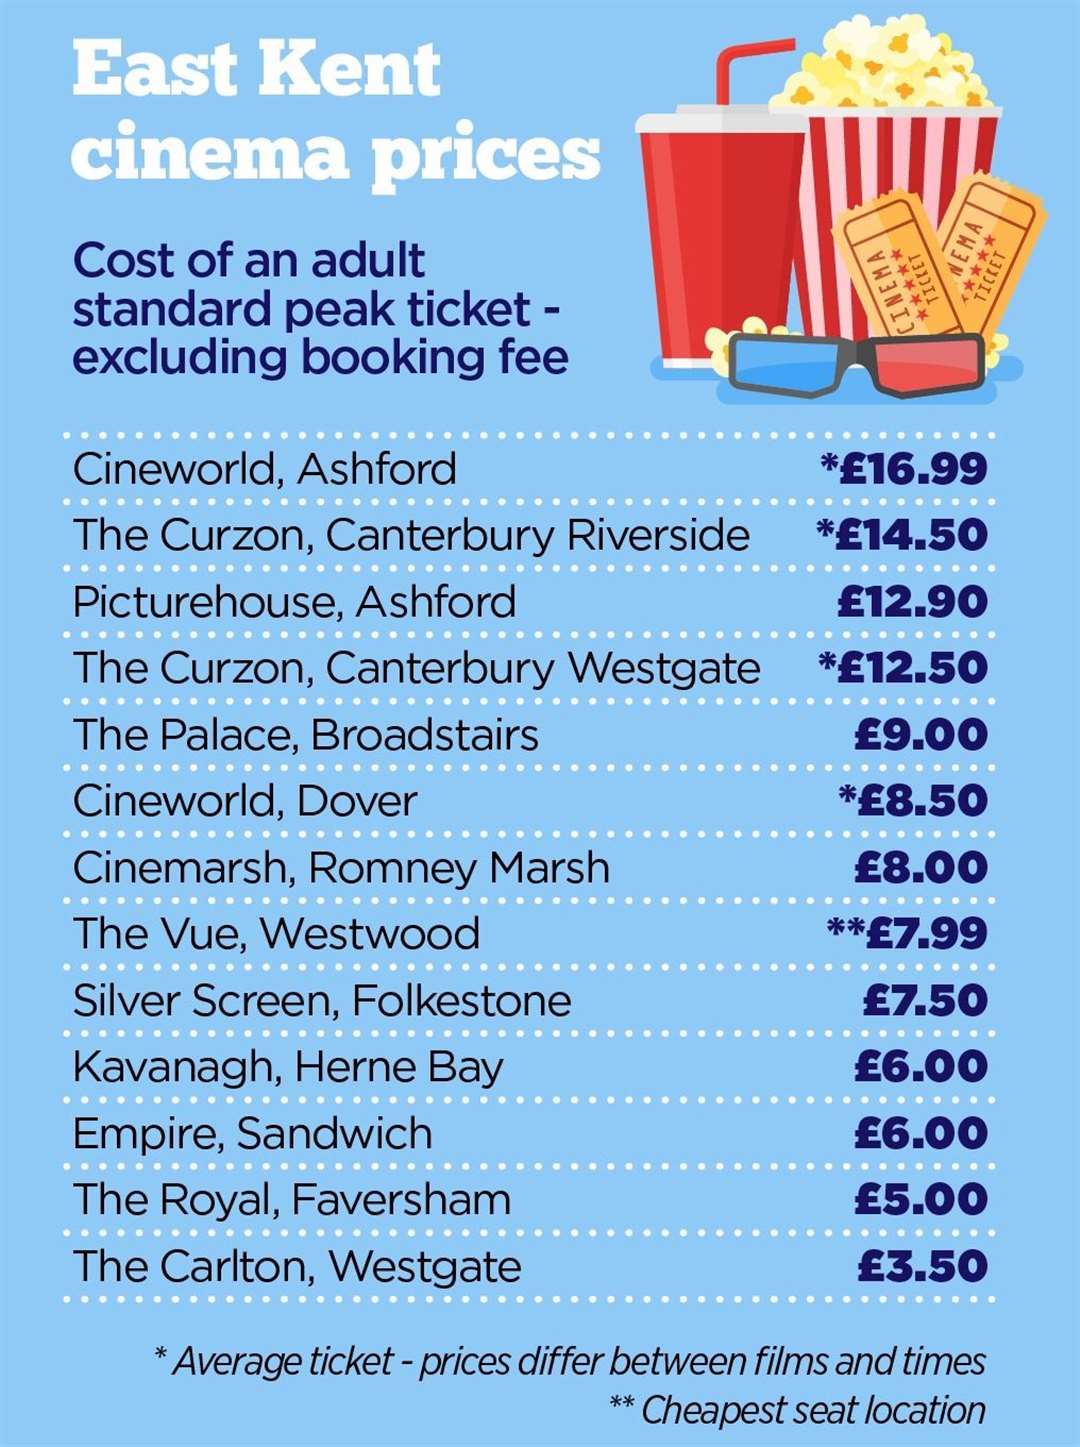 The Carlton is still the cheapest in East Kent when comparing standard adult tickets